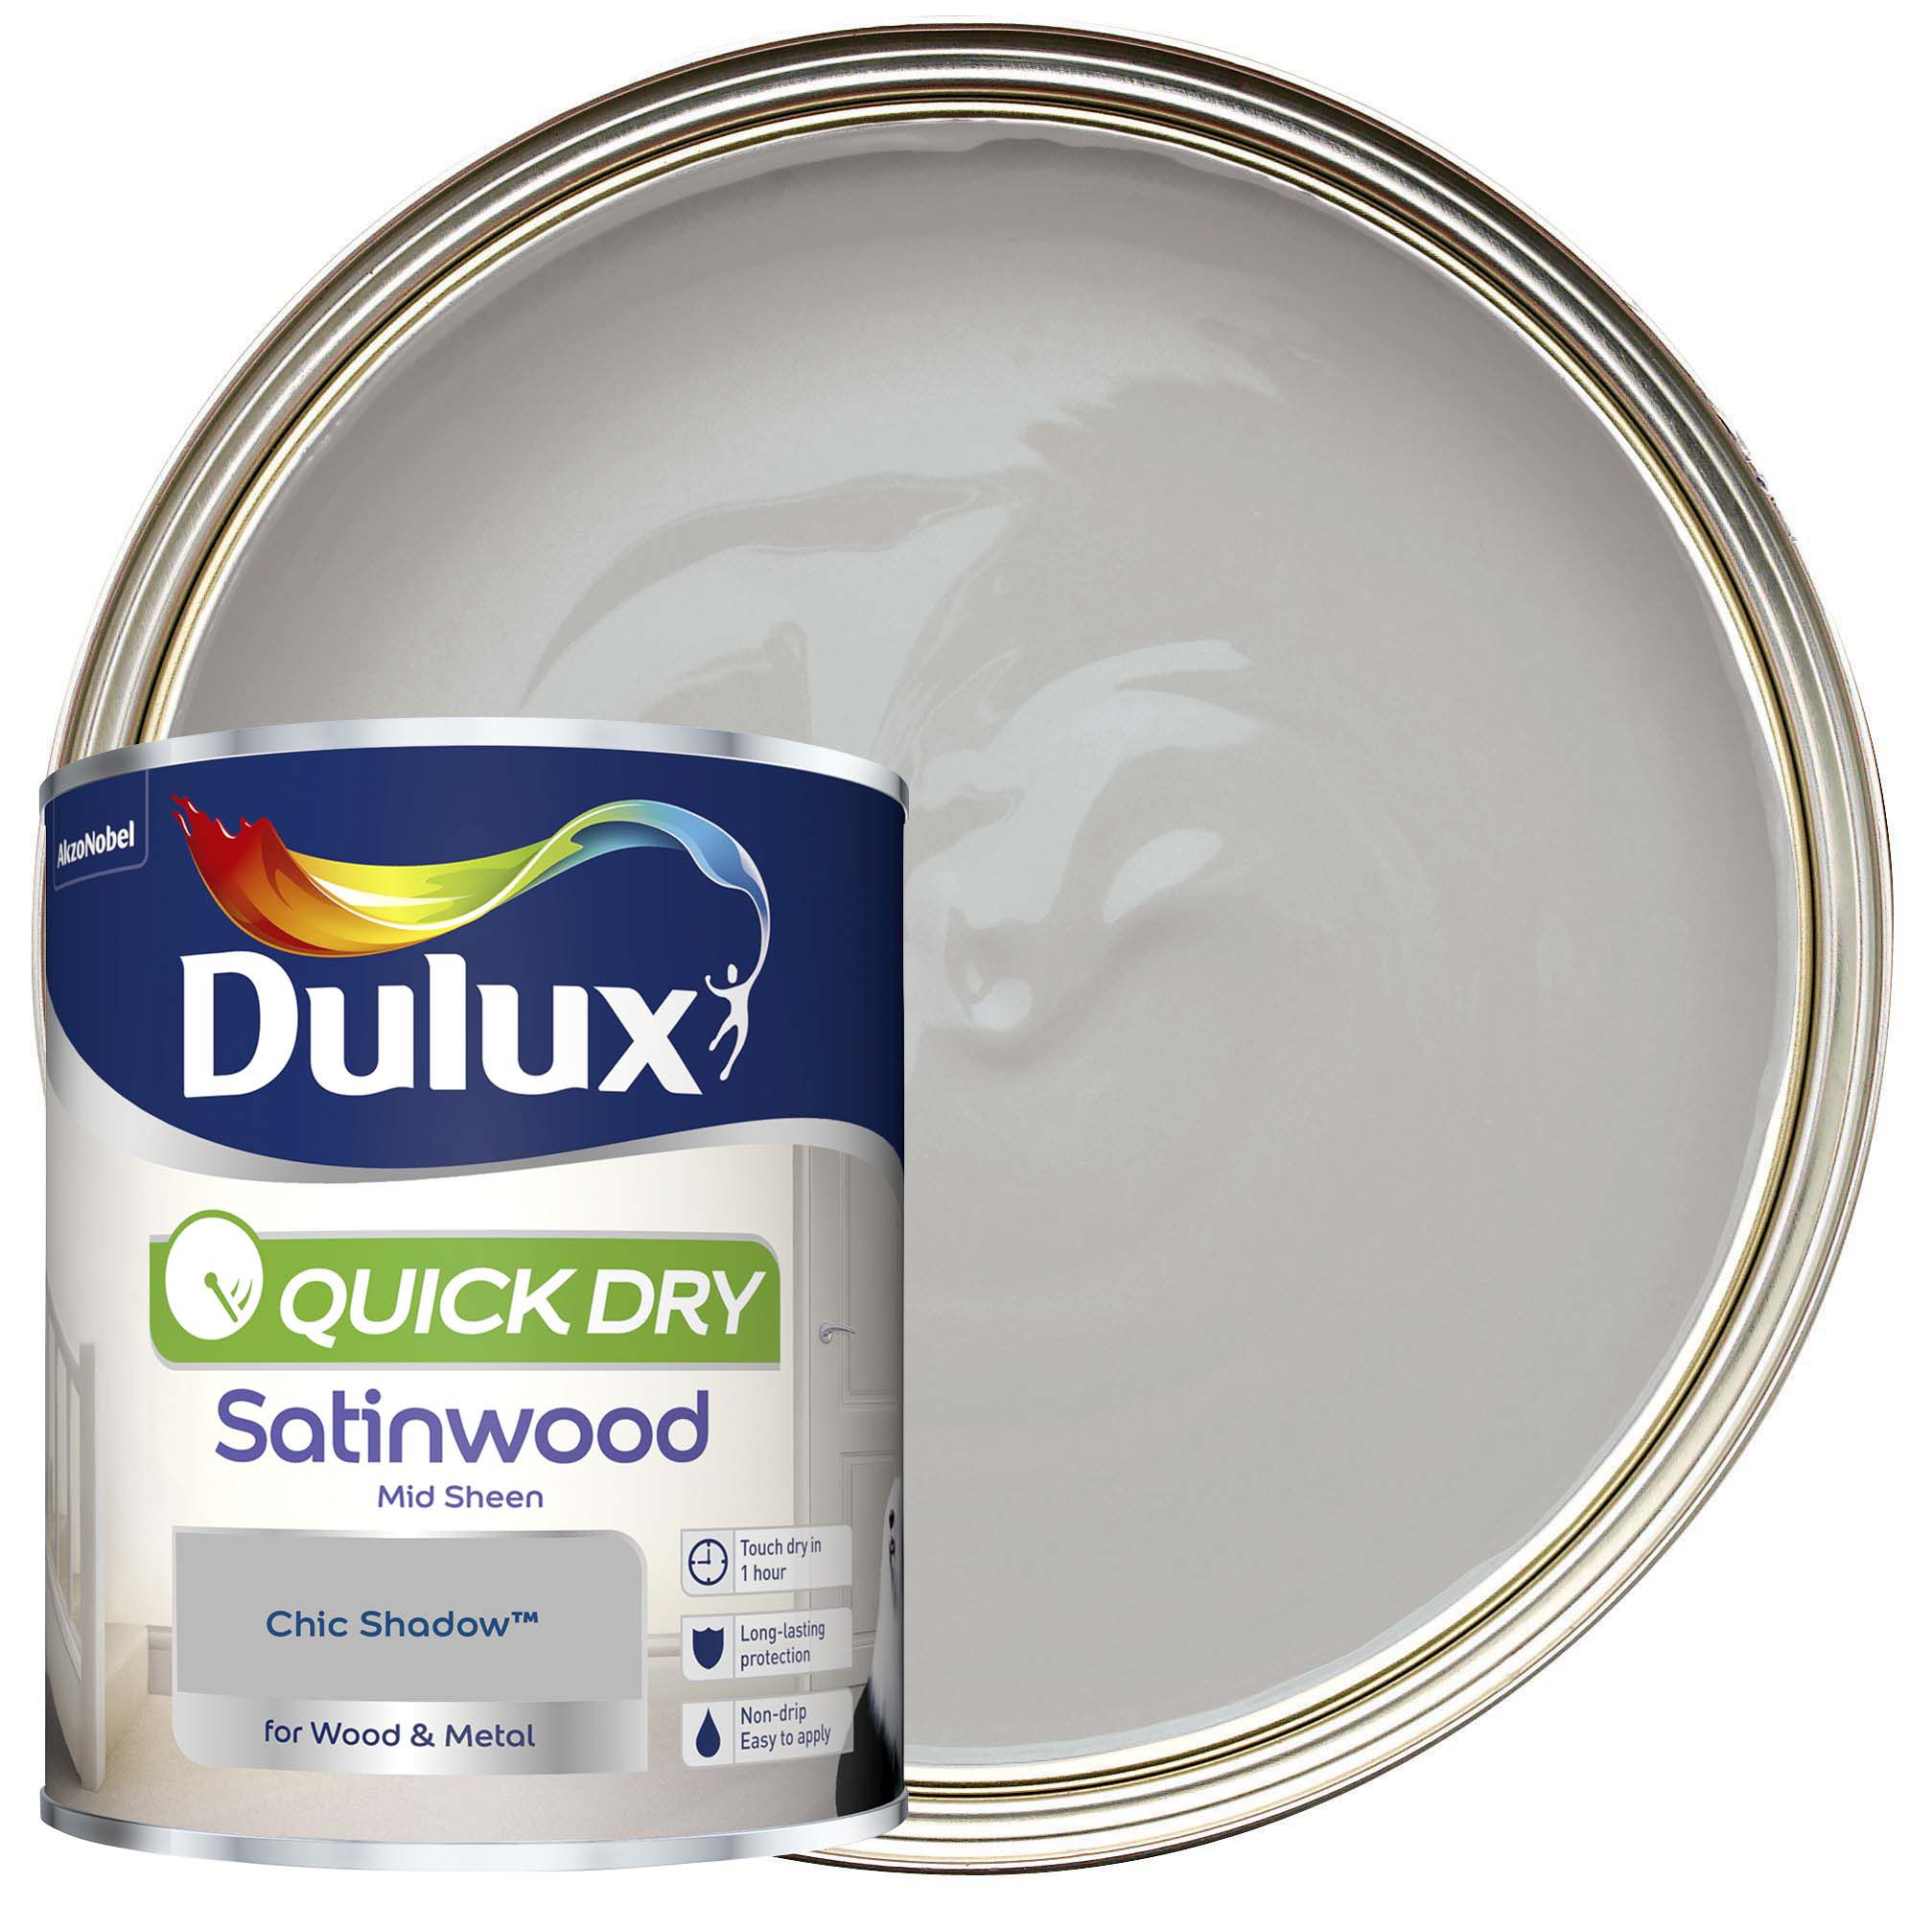 Dulux Quick Drying Satinwood Paint - Chic Shadow - 750ml